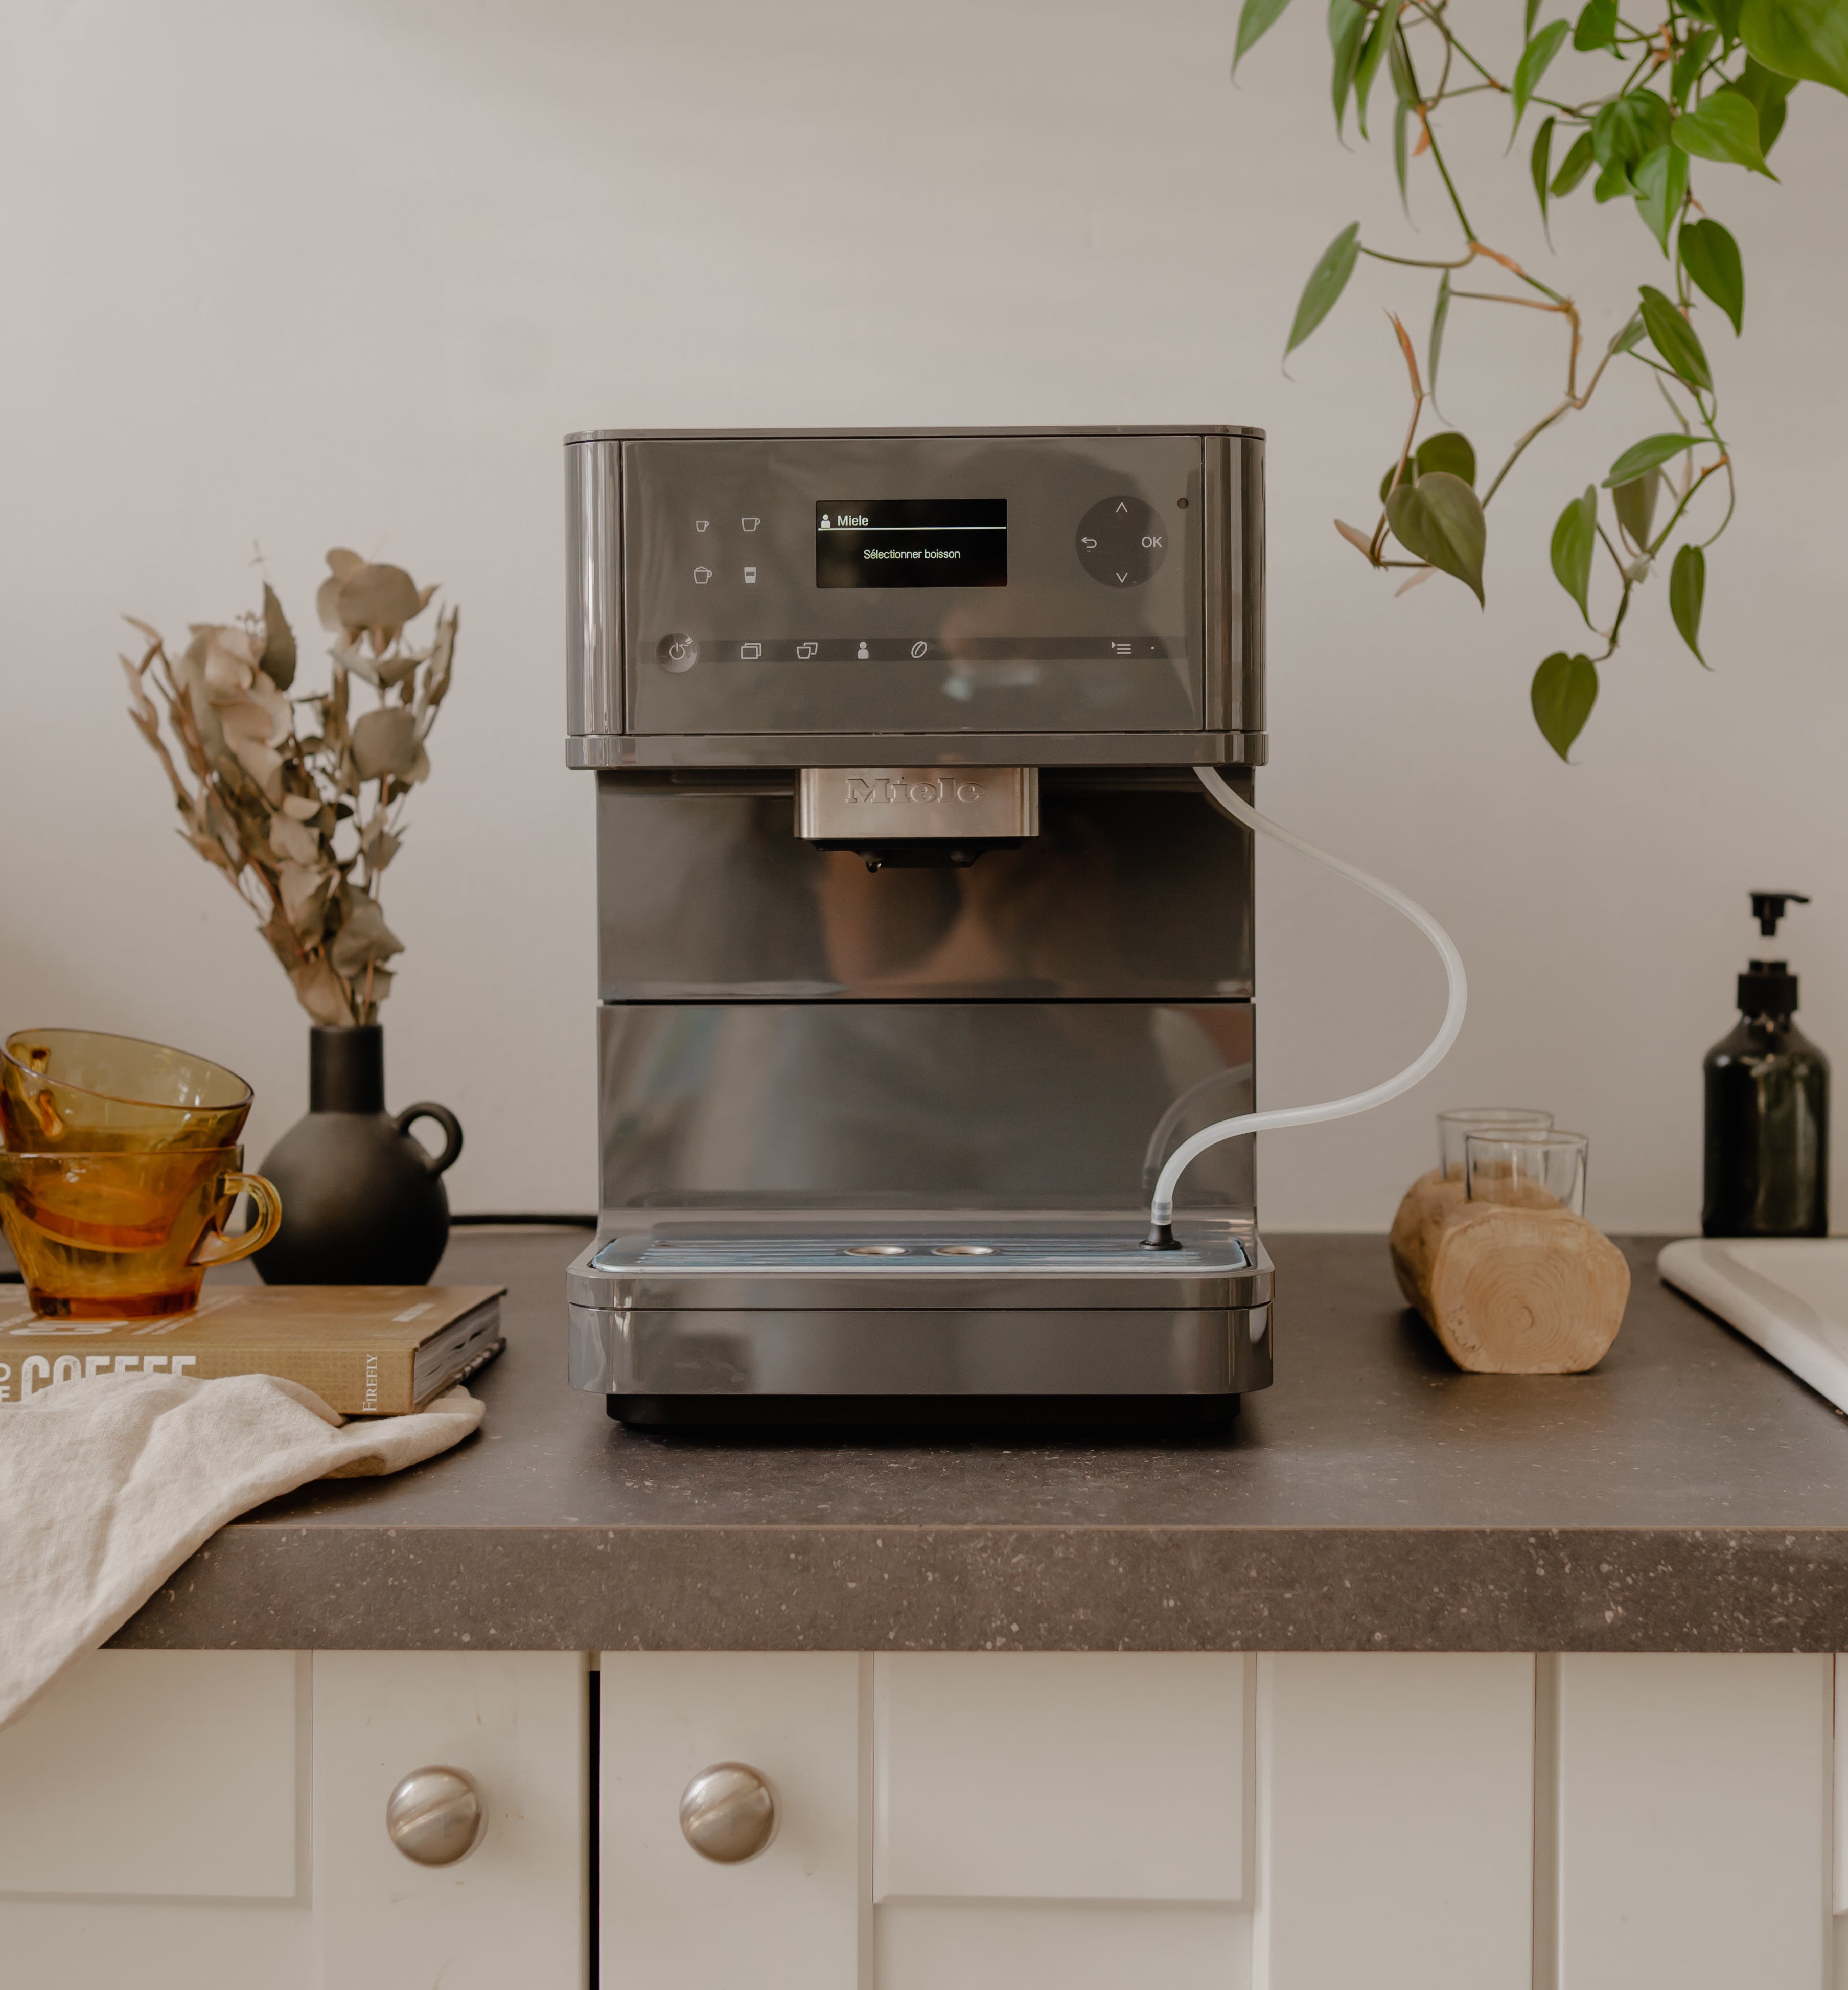 An easy to use automatic coffee machine by Miele